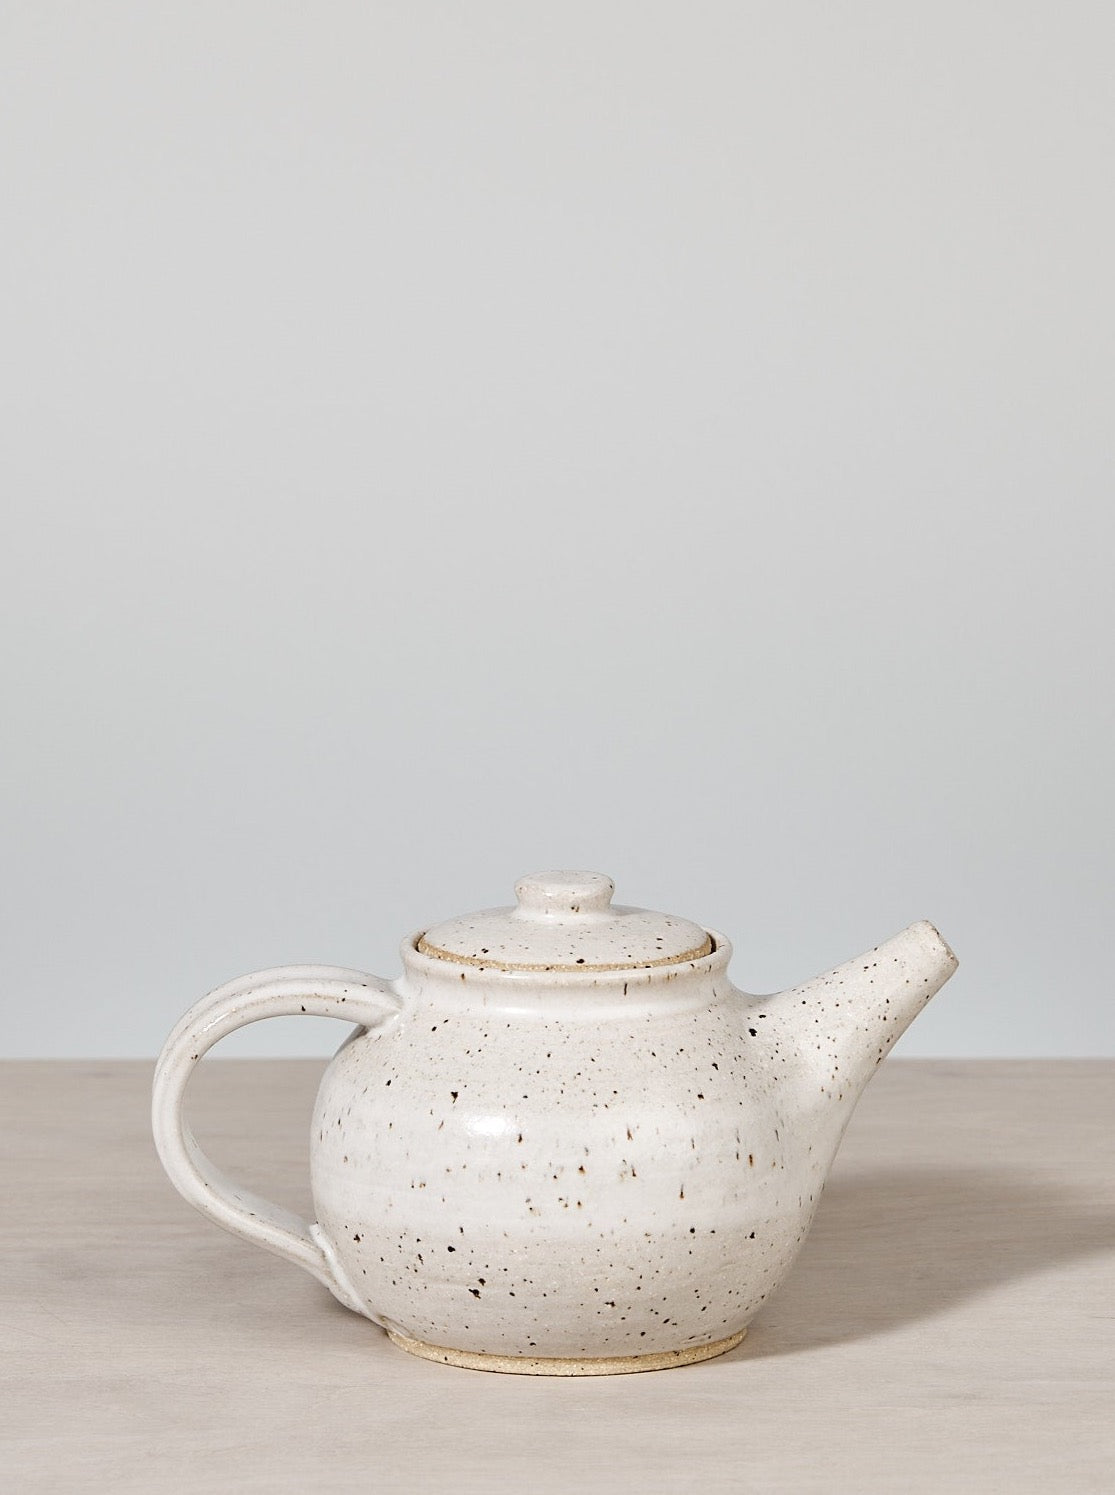 A handmade Nicola Shuttleworth Speckled Tea Pot sitting on a wooden table.